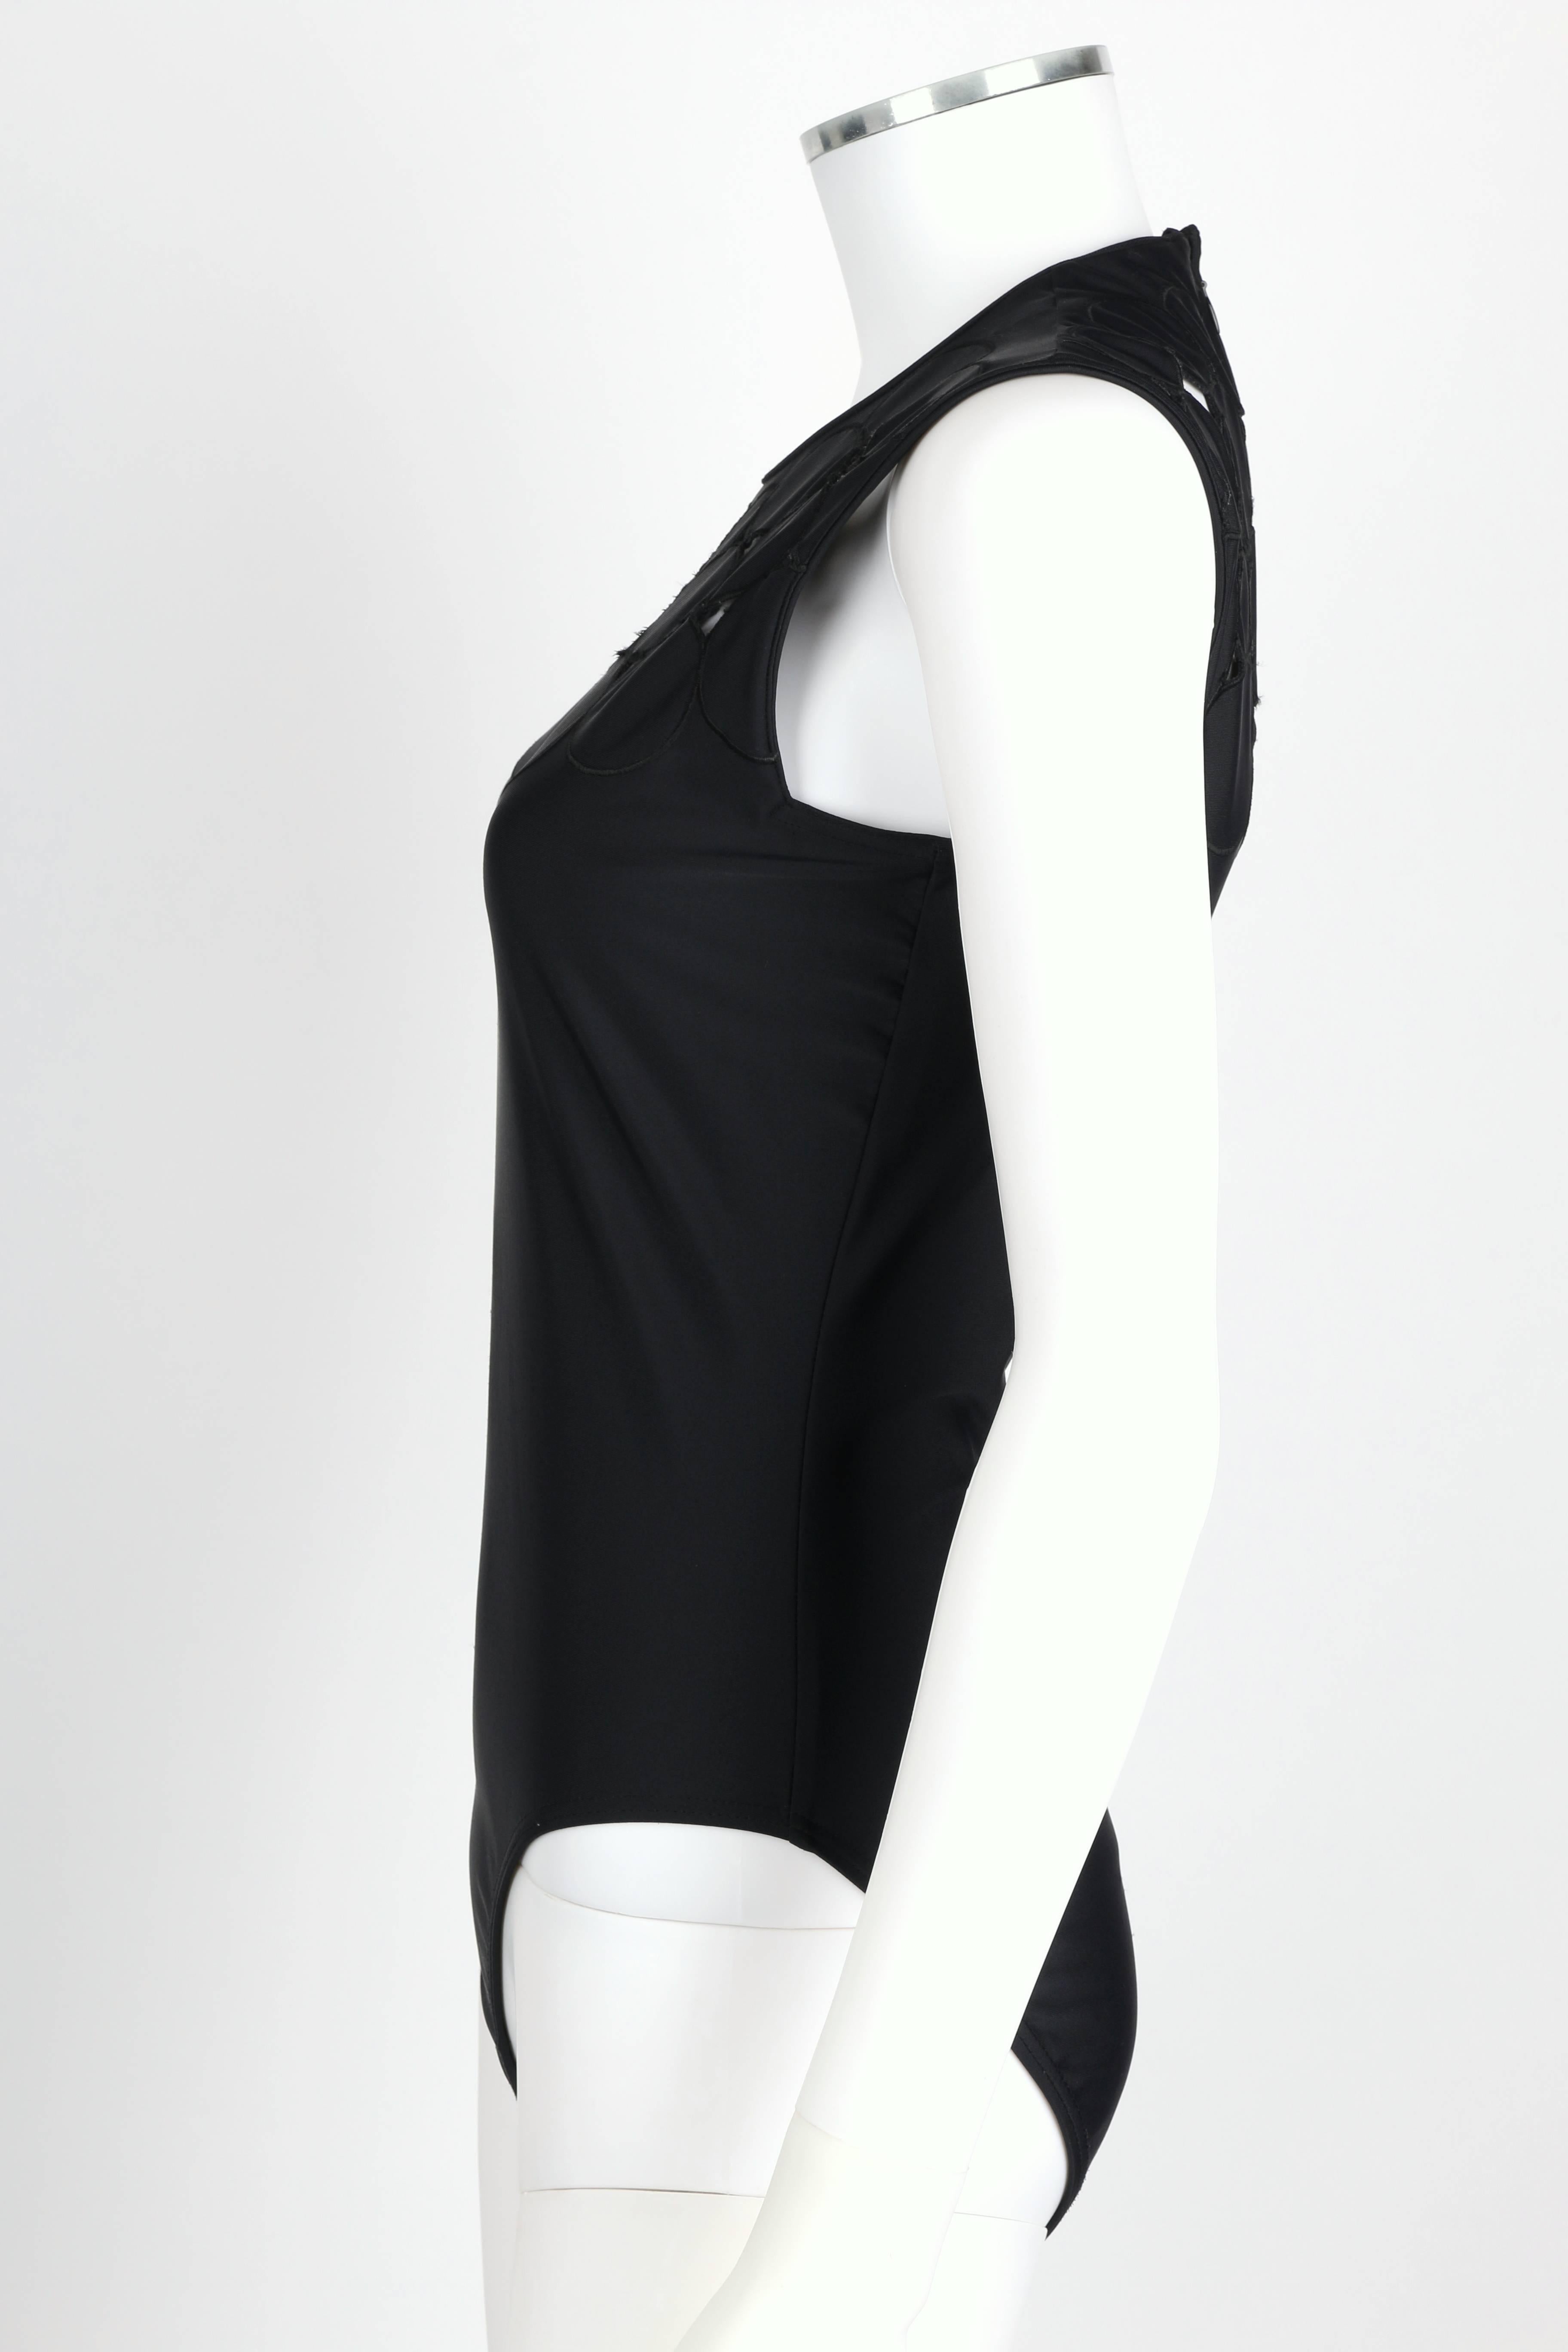 GIANNI VERSACE COUTURE S/S 1994 Black Sleeveless Circle Cutout Bodysuit Top For Sale 1